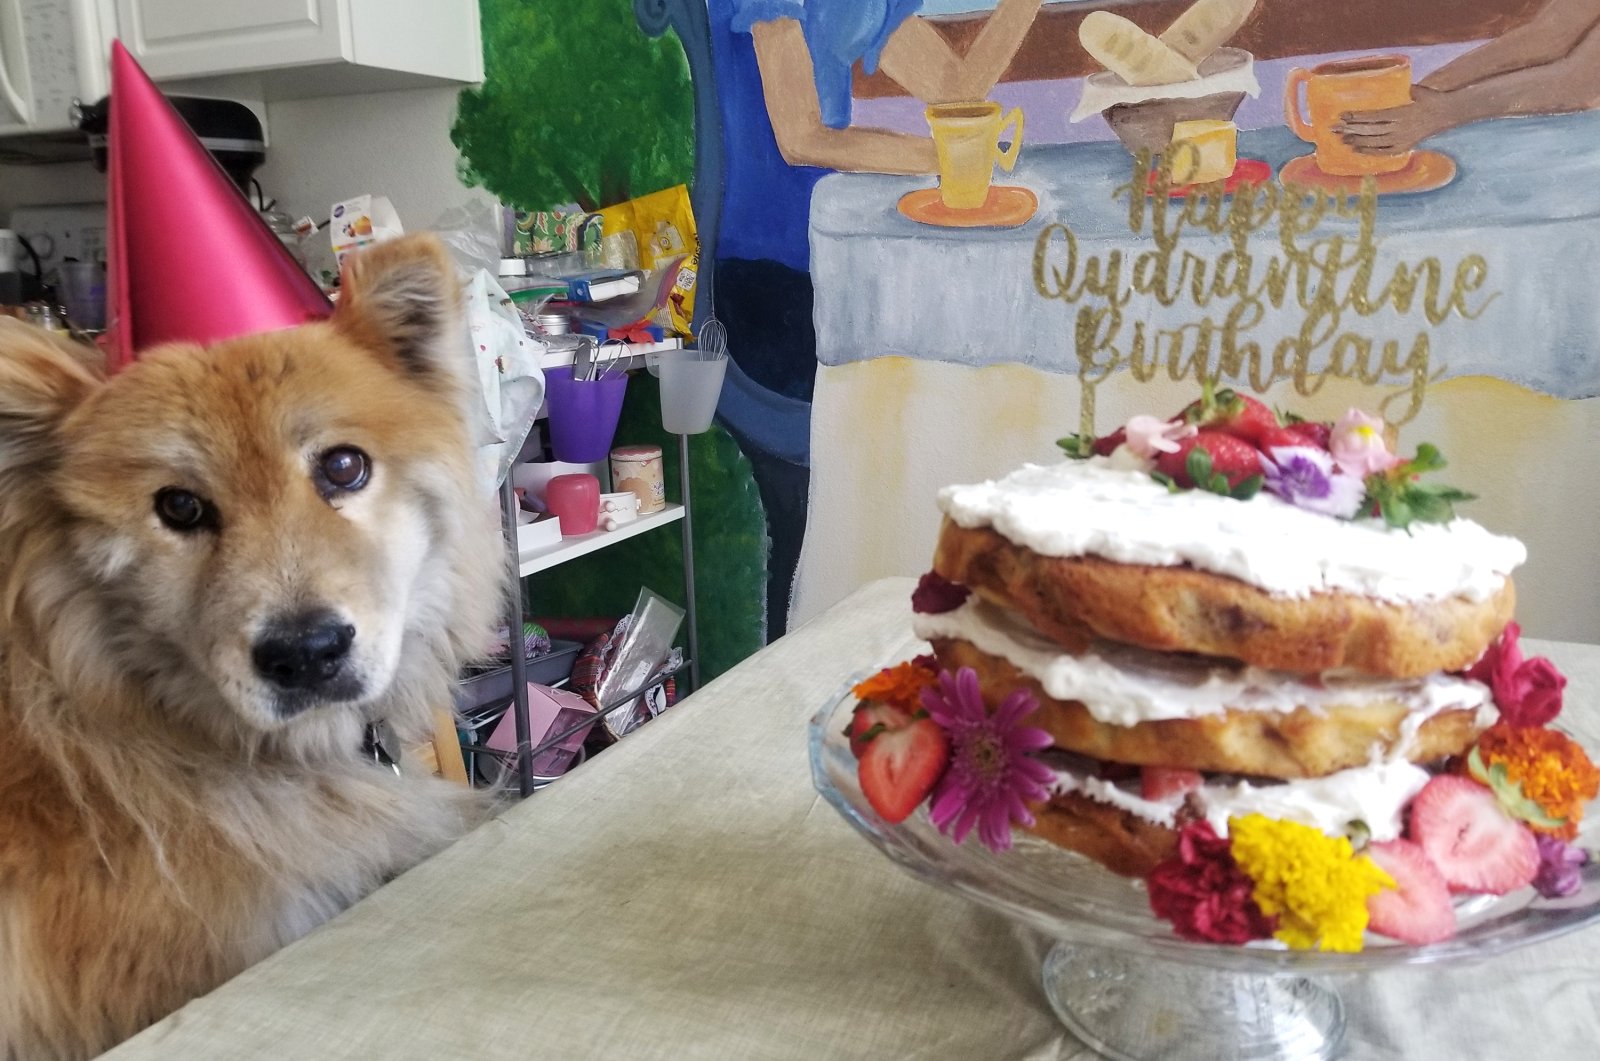 A dog named Penny sits next to a naked strawberry chamomile cake made to celebrate her birthday in isolation during the COVID-19 pandemic in Phoenix, Arizona, U.S., June 2020. (AP Photo/)